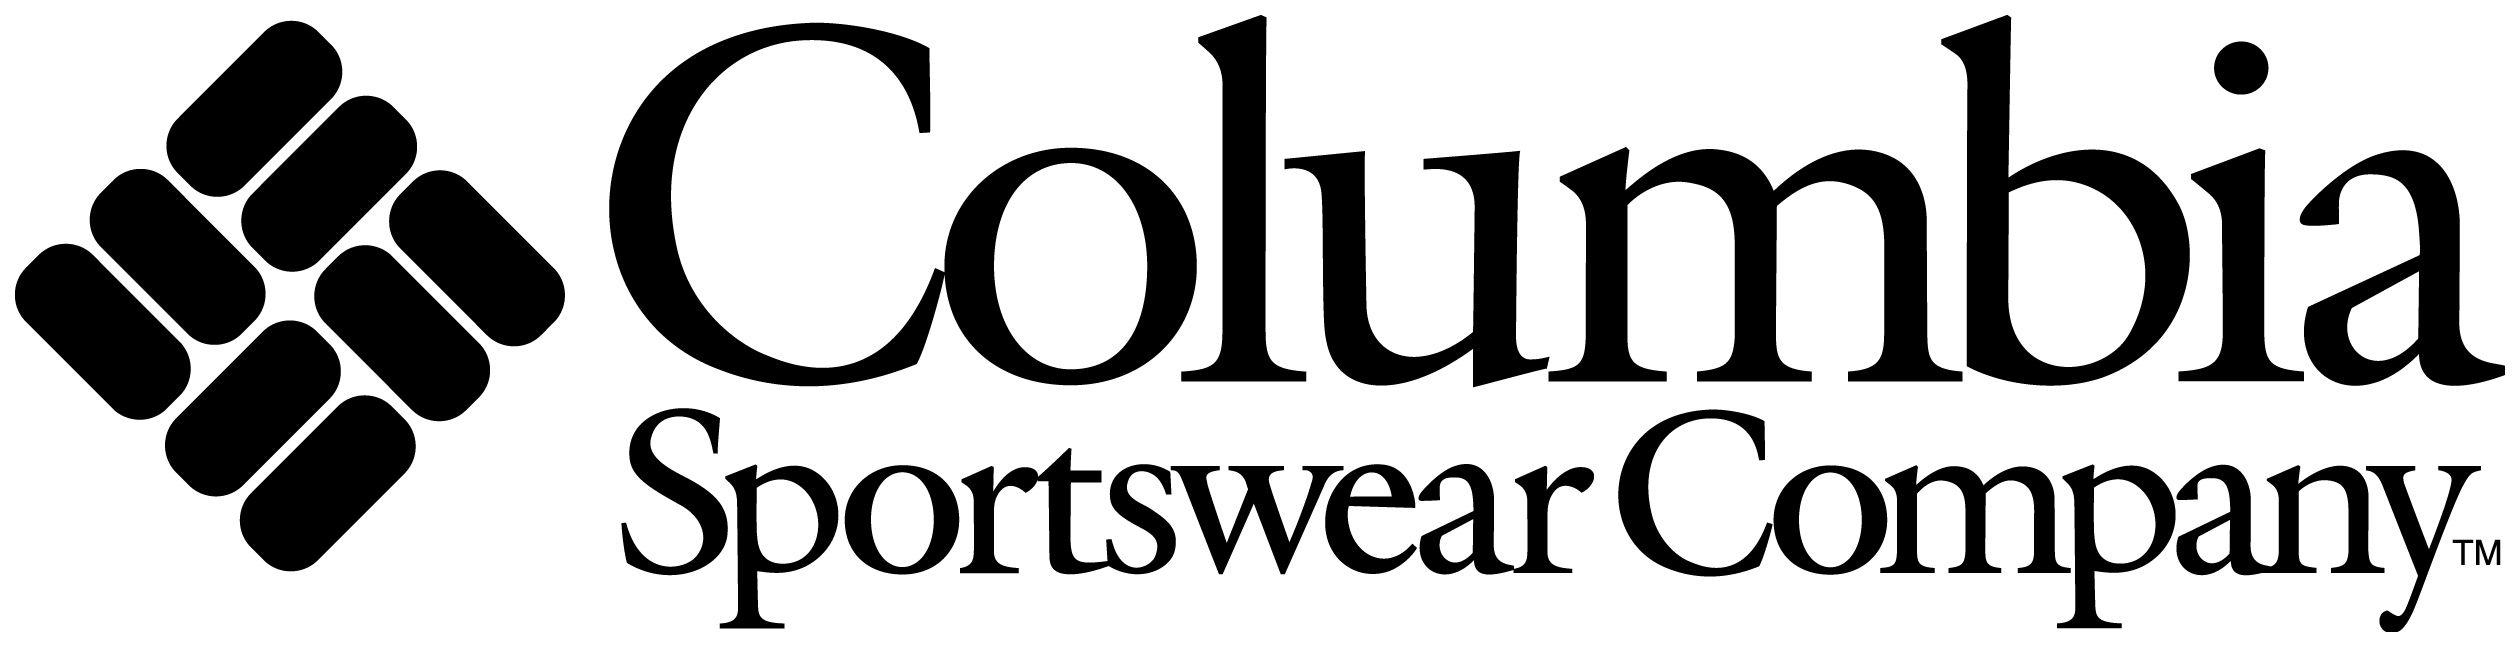 Outdoor Apparel Sportswear Company Logo - Columbia Sportswear Company Announces Appointment of Director Of ...